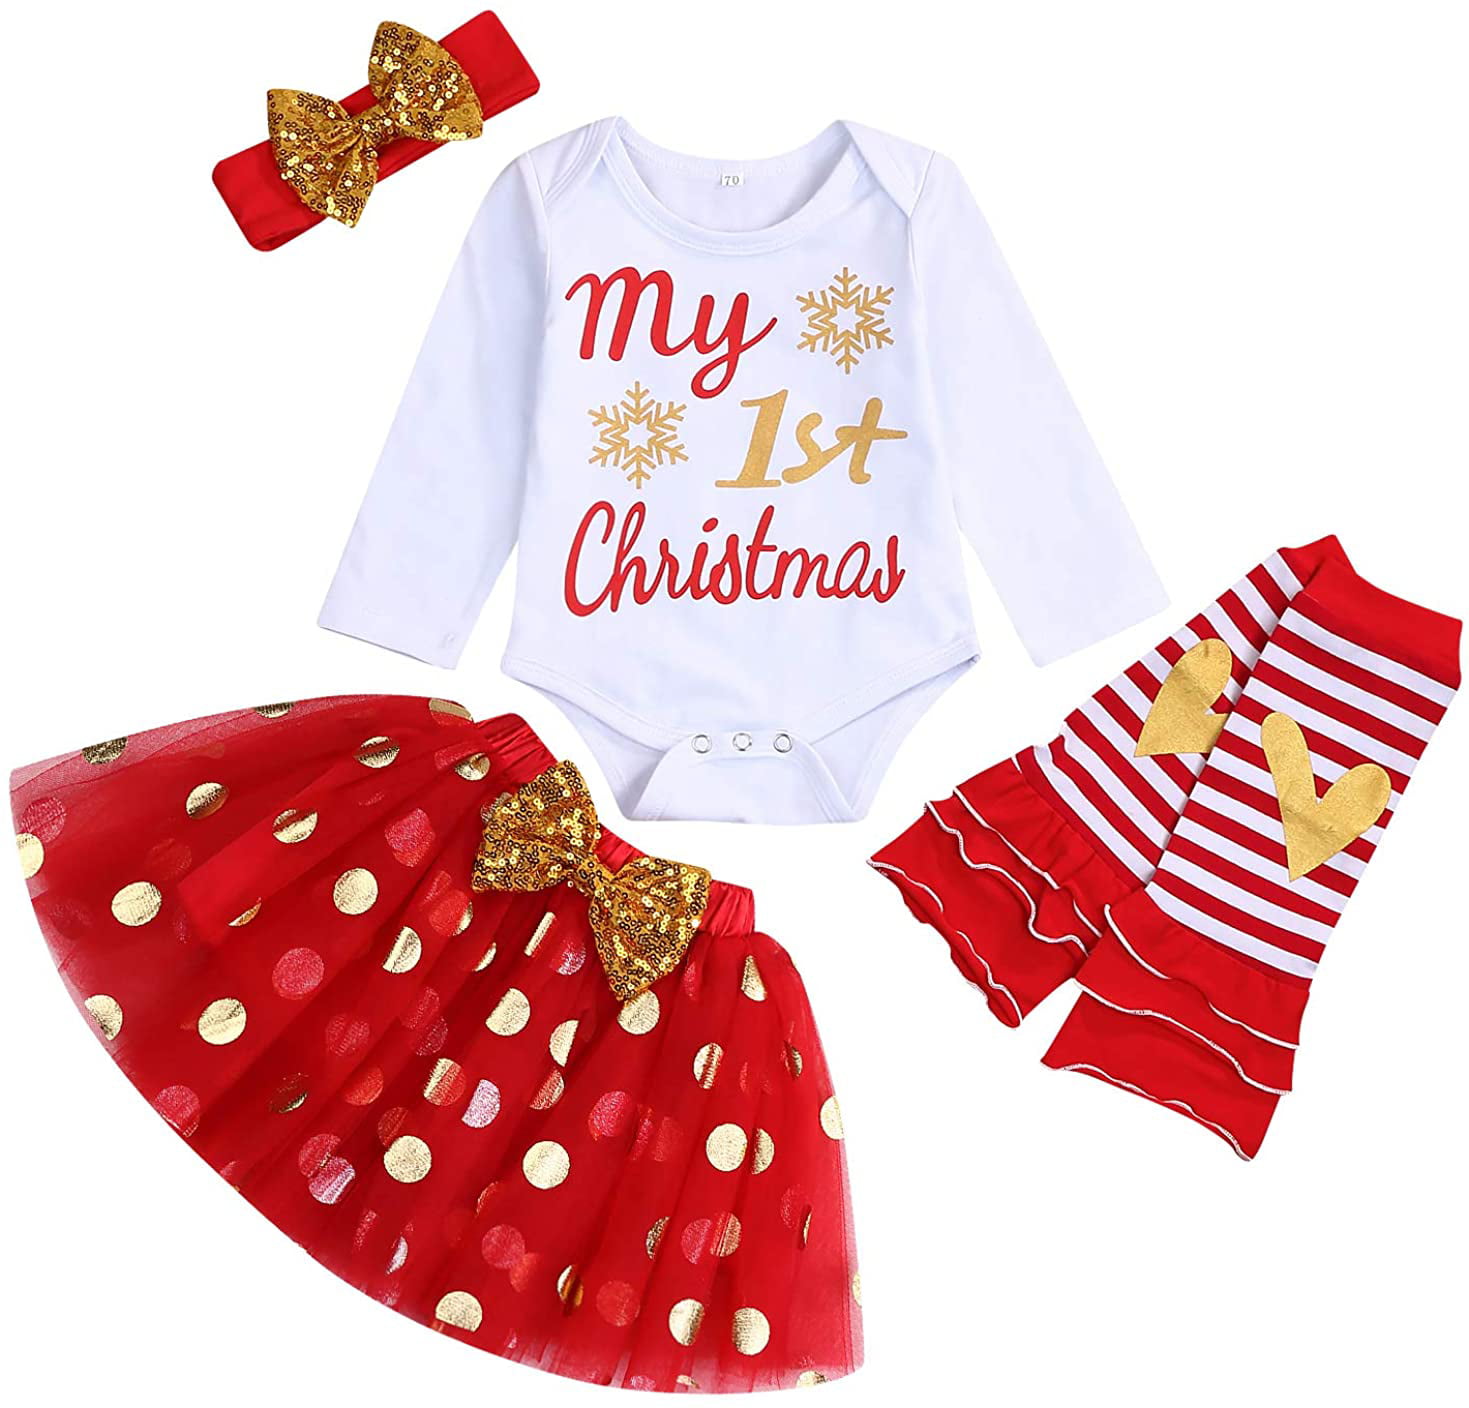 Baby Girls Christmas Skirt Set Infant Girl My 1st Christmas Romper and Plaid Tutu Skirt with Headband 3Pcs Outfits 